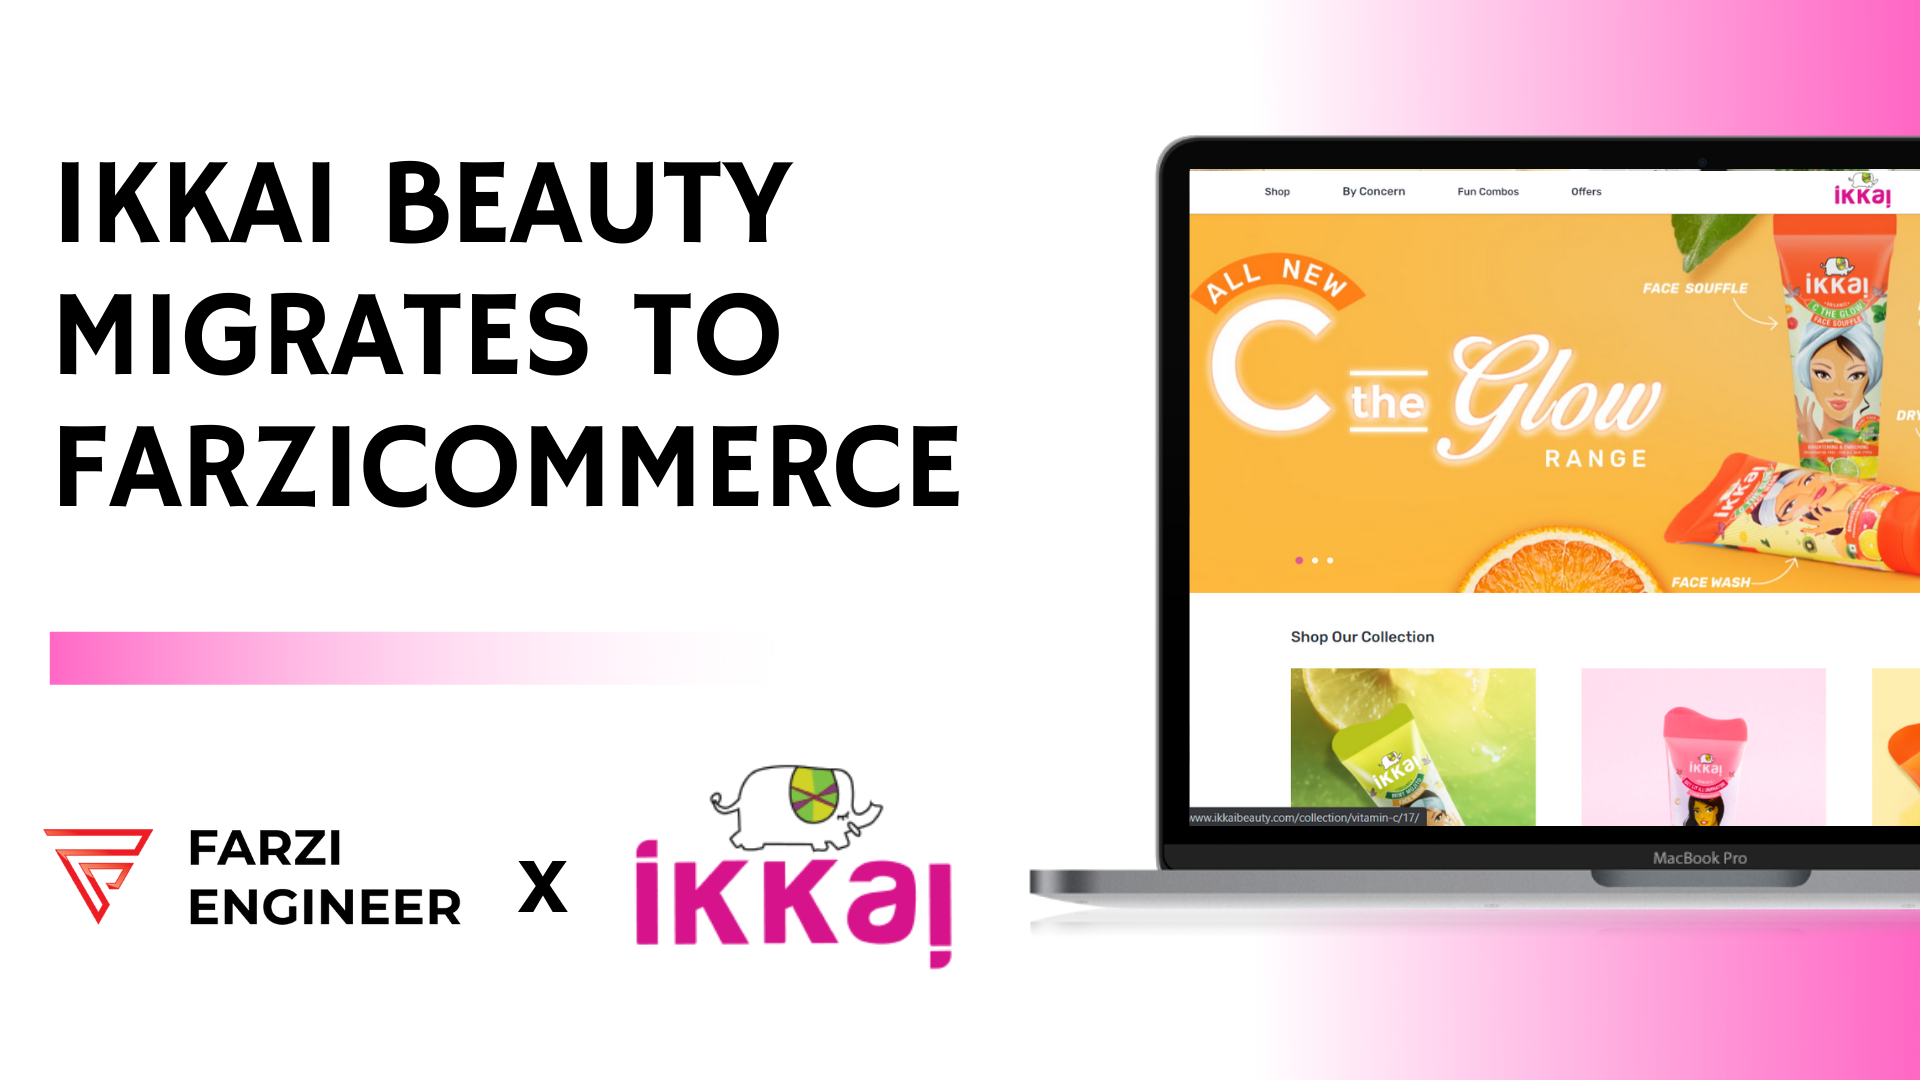 You are currently viewing FarziCommerce: a helping hand to Ikkai Beauty